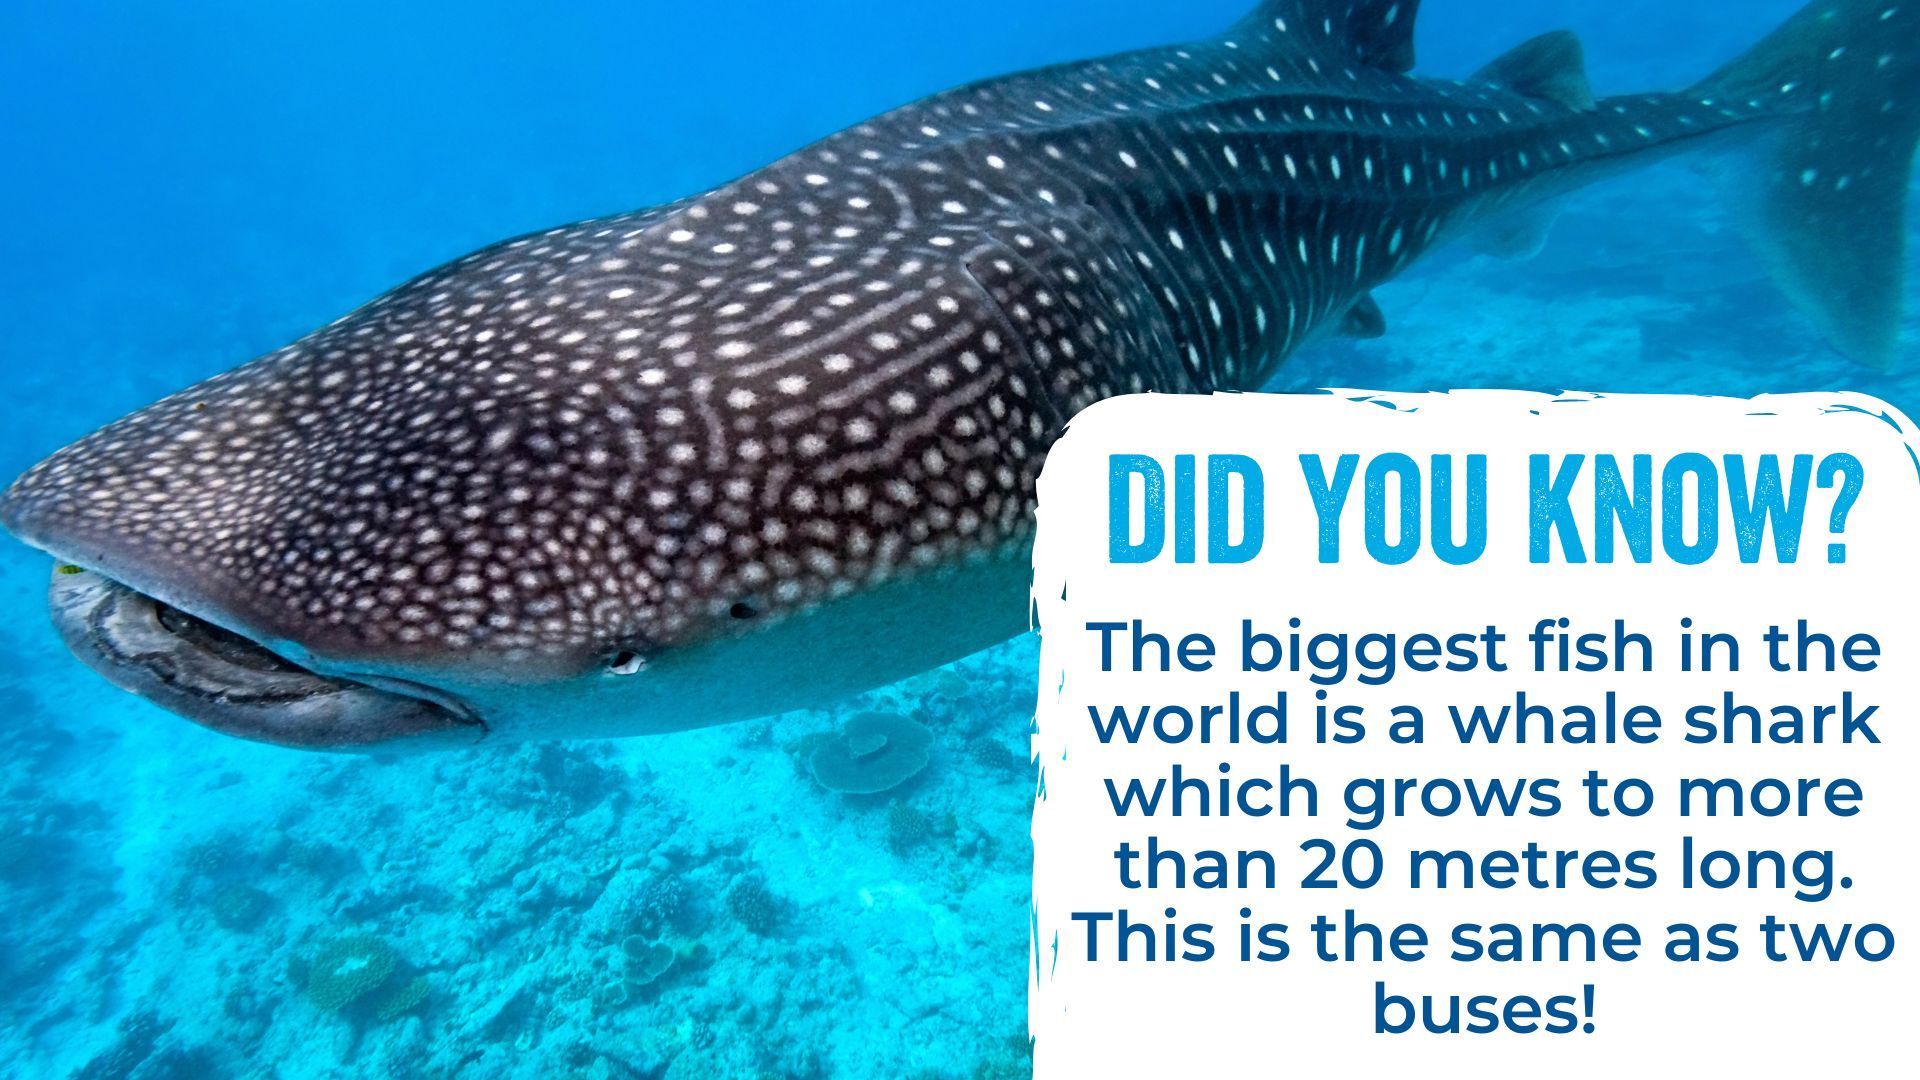 The biggest fish in the world is a whale shark which grows to more than 20 metres long. This is the same as two buses!